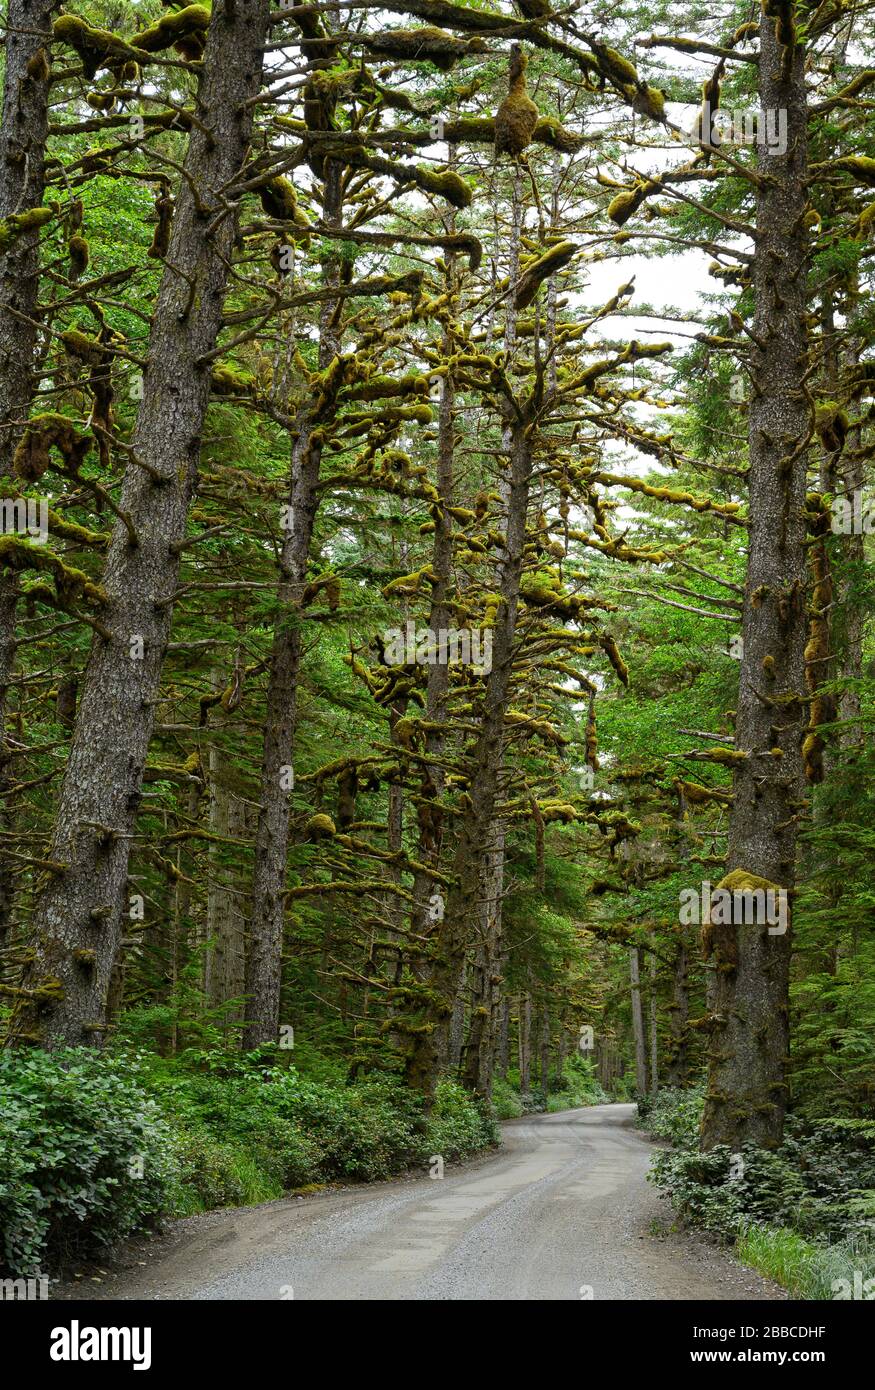 Tow Hill road, Haida Gwaii, Formerly known as Queen Charlotte Islands, British Columbia, Canada Stock Photo